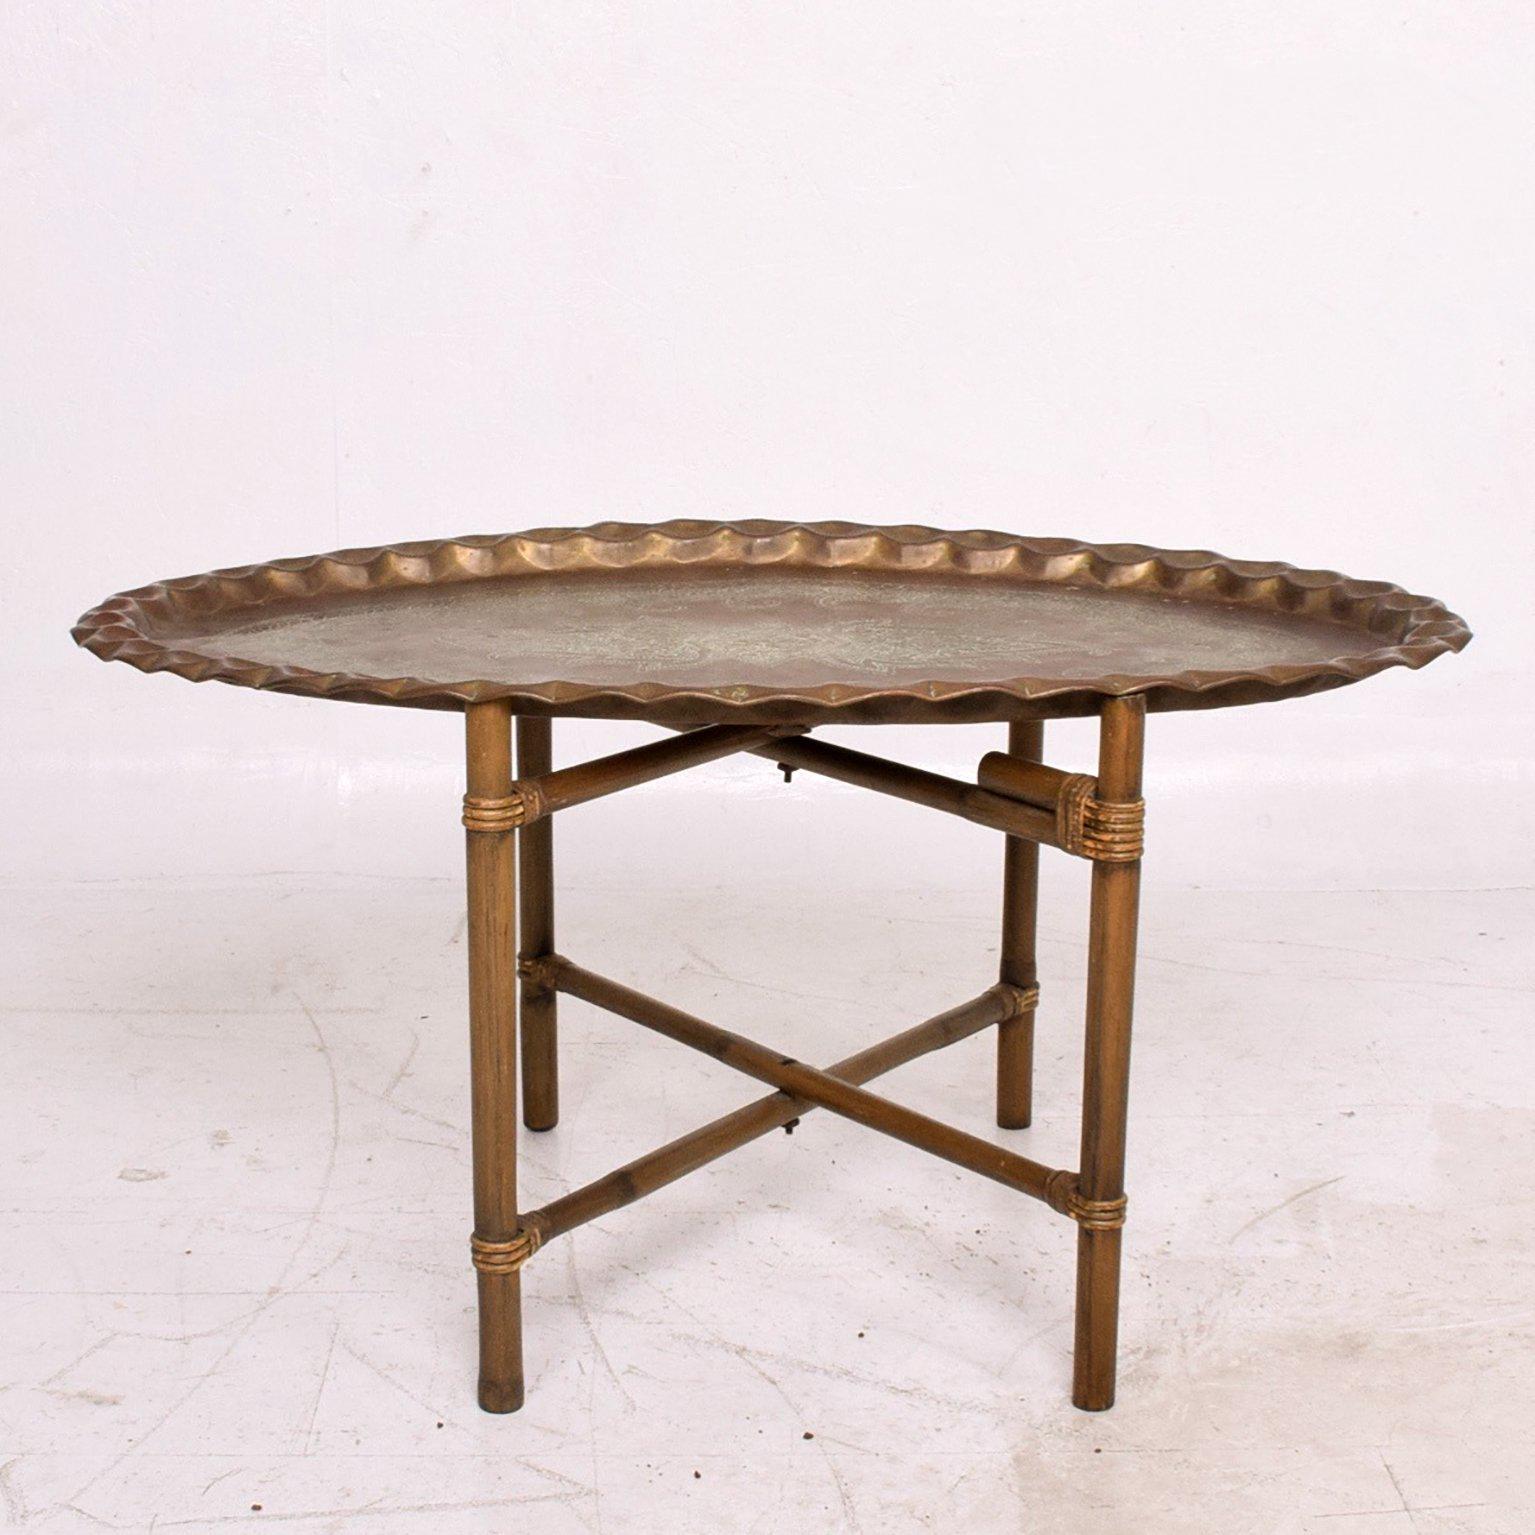 For your consideration a vintage coffee table made of bamboo base and scalloped brass tabletop in oval shape. 

Original vintage patina. Great character. 
19 1/4